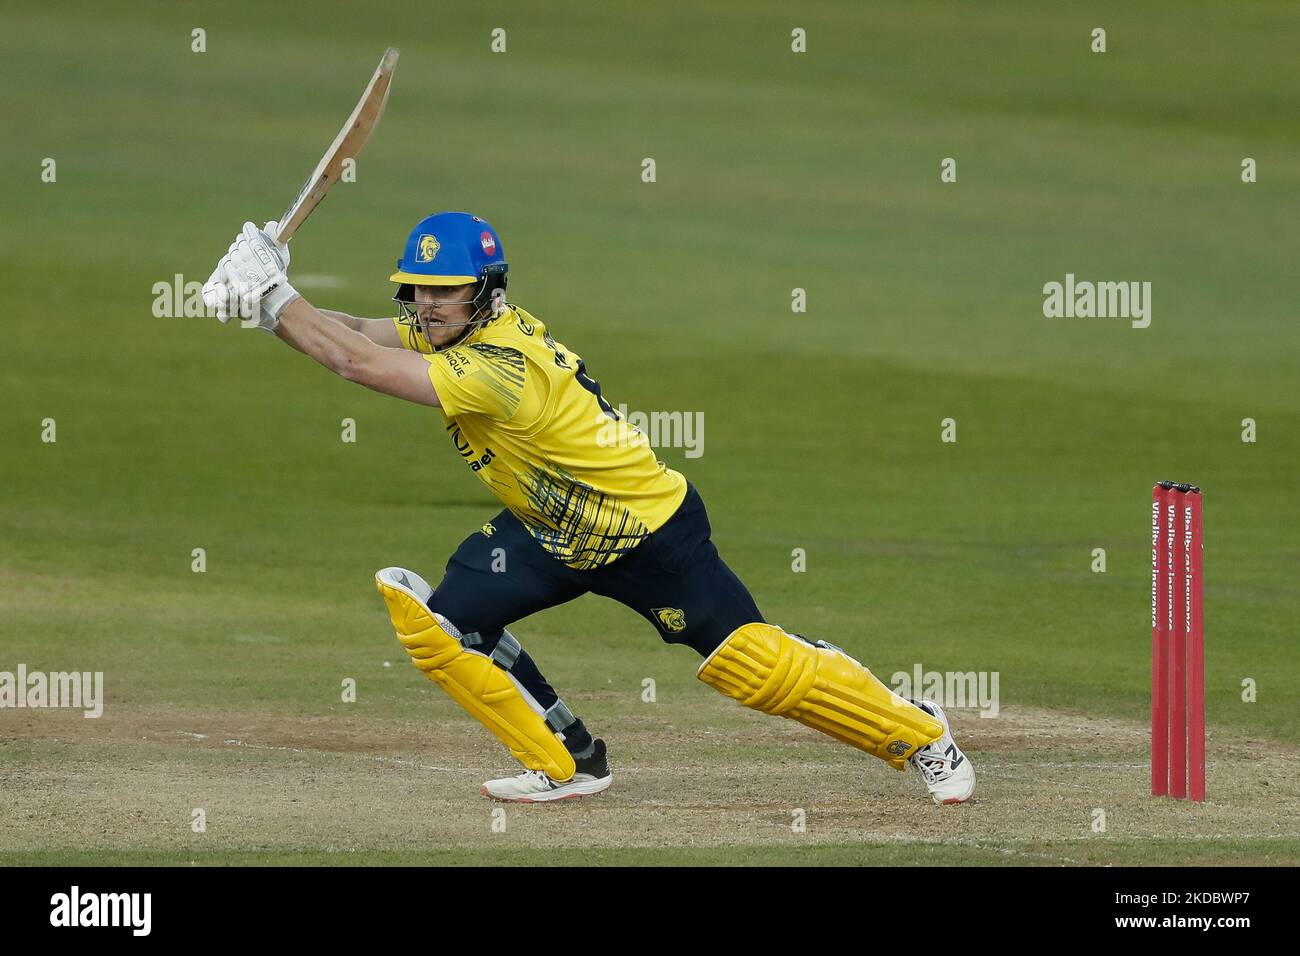 Liam Trevaskis of Durham bats during the Vitality Blast T20 match between Durham County Cricket Club and Lancashire at the Seat Unique Riverside, Chester le Street on Friday 10th June 2022. (Photo by Will Matthews/MI News/NurPhoto) Stock Photo